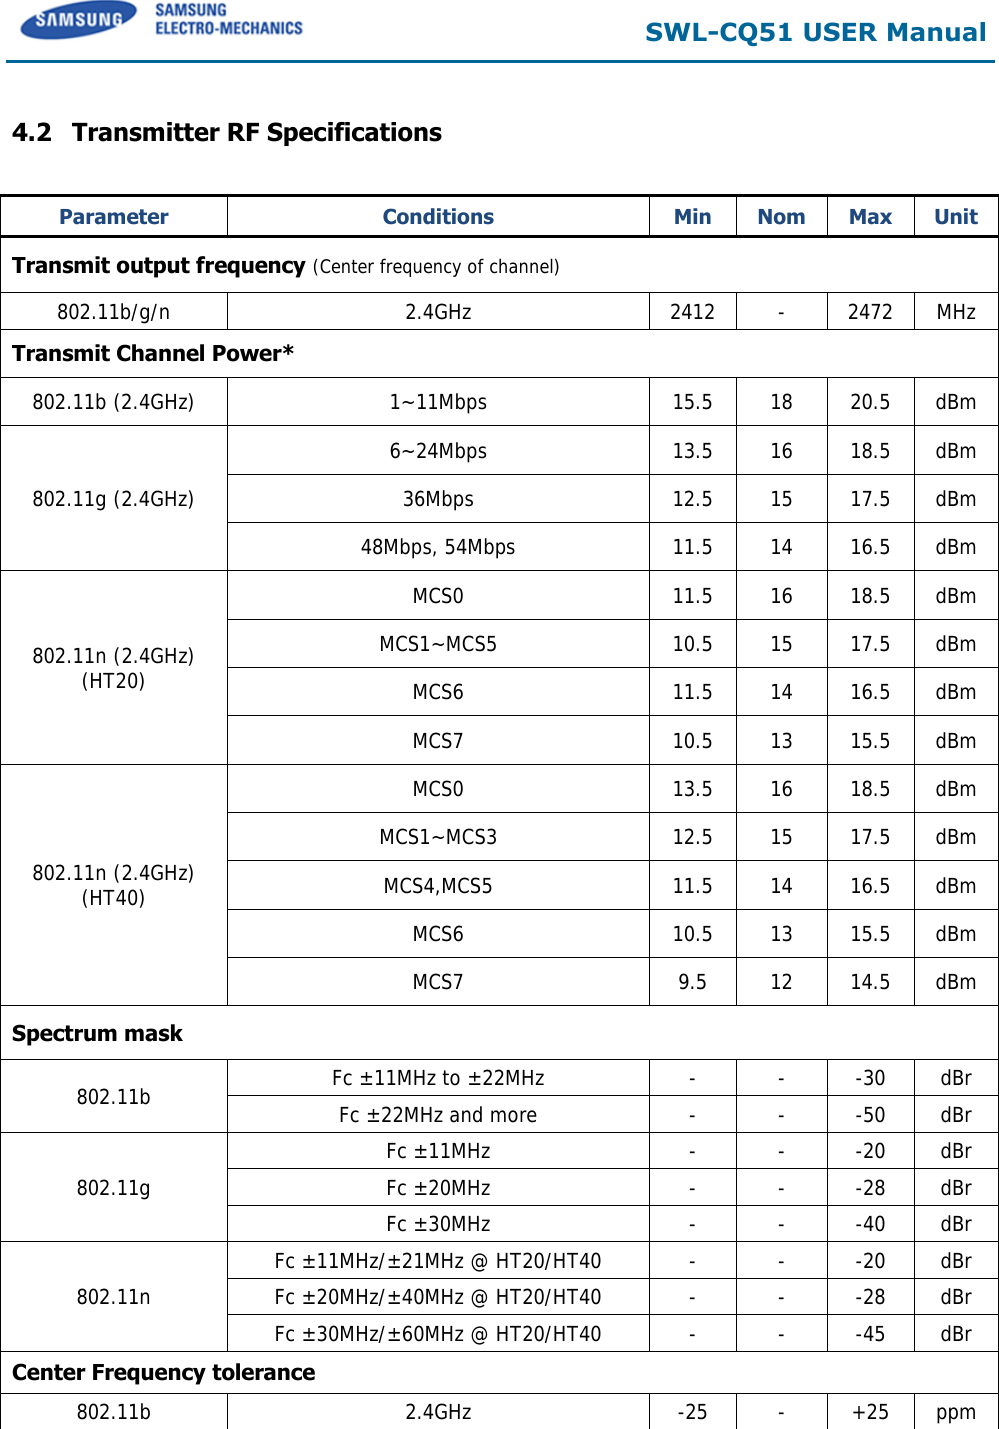  SWL-CQ51 USER Manual  4.2 Transmitter RF Specifications   Parameter Conditions Min Nom Max Unit Transmit output frequency (Center frequency of channel) 802.11b/g/n 2.4GHz 2412 - 2472 MHz Transmit Channel Power* 802.11b (2.4GHz) 1~11Mbps 15.5 18 20.5 dBm 802.11g (2.4GHz) 6~24Mbps 13.5 16 18.5 dBm 36Mbps 12.5 15 17.5 dBm 48Mbps, 54Mbps 11.5 14 16.5 dBm 802.11n (2.4GHz) (HT20) MCS0 11.5 16 18.5 dBm MCS1~MCS5 10.5 15 17.5 dBm MCS6 11.5 14 16.5 dBm MCS7 10.5 13 15.5 dBm 802.11n (2.4GHz) (HT40) MCS0 13.5 16 18.5 dBm MCS1~MCS3 12.5 15 17.5 dBm MCS4,MCS5 11.5 14 16.5 dBm MCS6 10.5 13 15.5 dBm MCS7 9.5 12 14.5 dBm Spectrum mask 802.11b Fc ± 11MHz to ± 22MHz - - -30 dBr Fc ± 22MHz and more - - -50 dBr 802.11g Fc ± 11MHz - - -20 dBr Fc ± 20MHz - - -28 dBr Fc ± 30MHz - - -40 dBr 802.11n Fc ± 11MHz/± 21MHz @ HT20/HT40 - - -20 dBr Fc ± 20MHz/± 40MHz @ HT20/HT40 - - -28 dBr Fc ± 30MHz/± 60MHz @ HT20/HT40 - - -45 dBr Center Frequency tolerance 802.11b 2.4GHz -25 - +25 ppm 